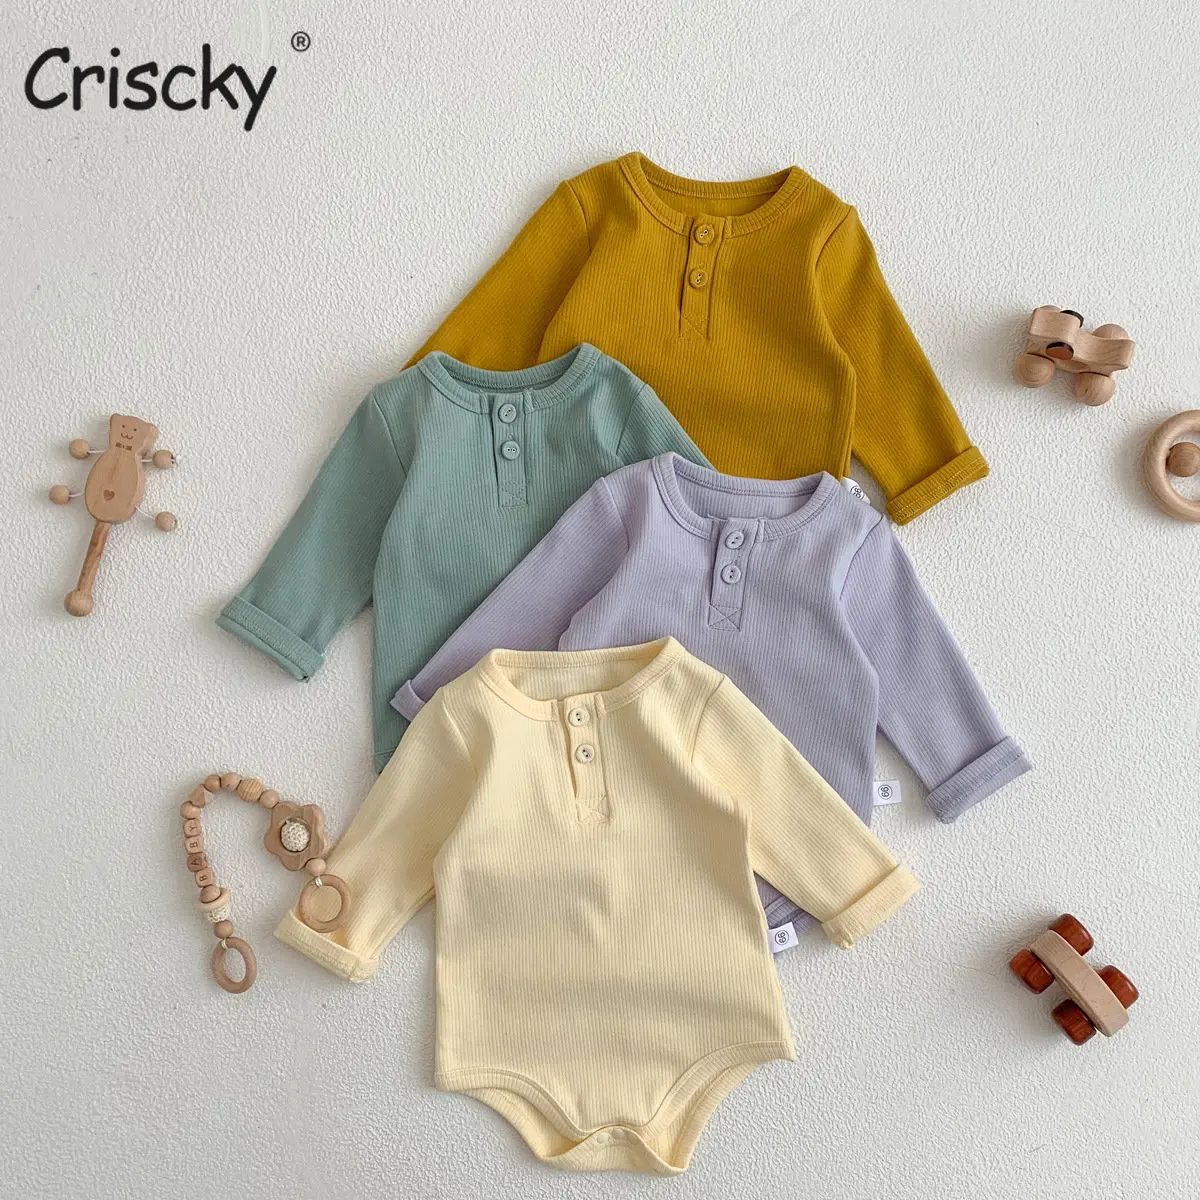 

Criscky 2022 Fashion Baby Girls Romper Cotton Long Sleeve O Neck Baby Rompers Infant Playsuit Jumpsuits Cute Newborn Clothes